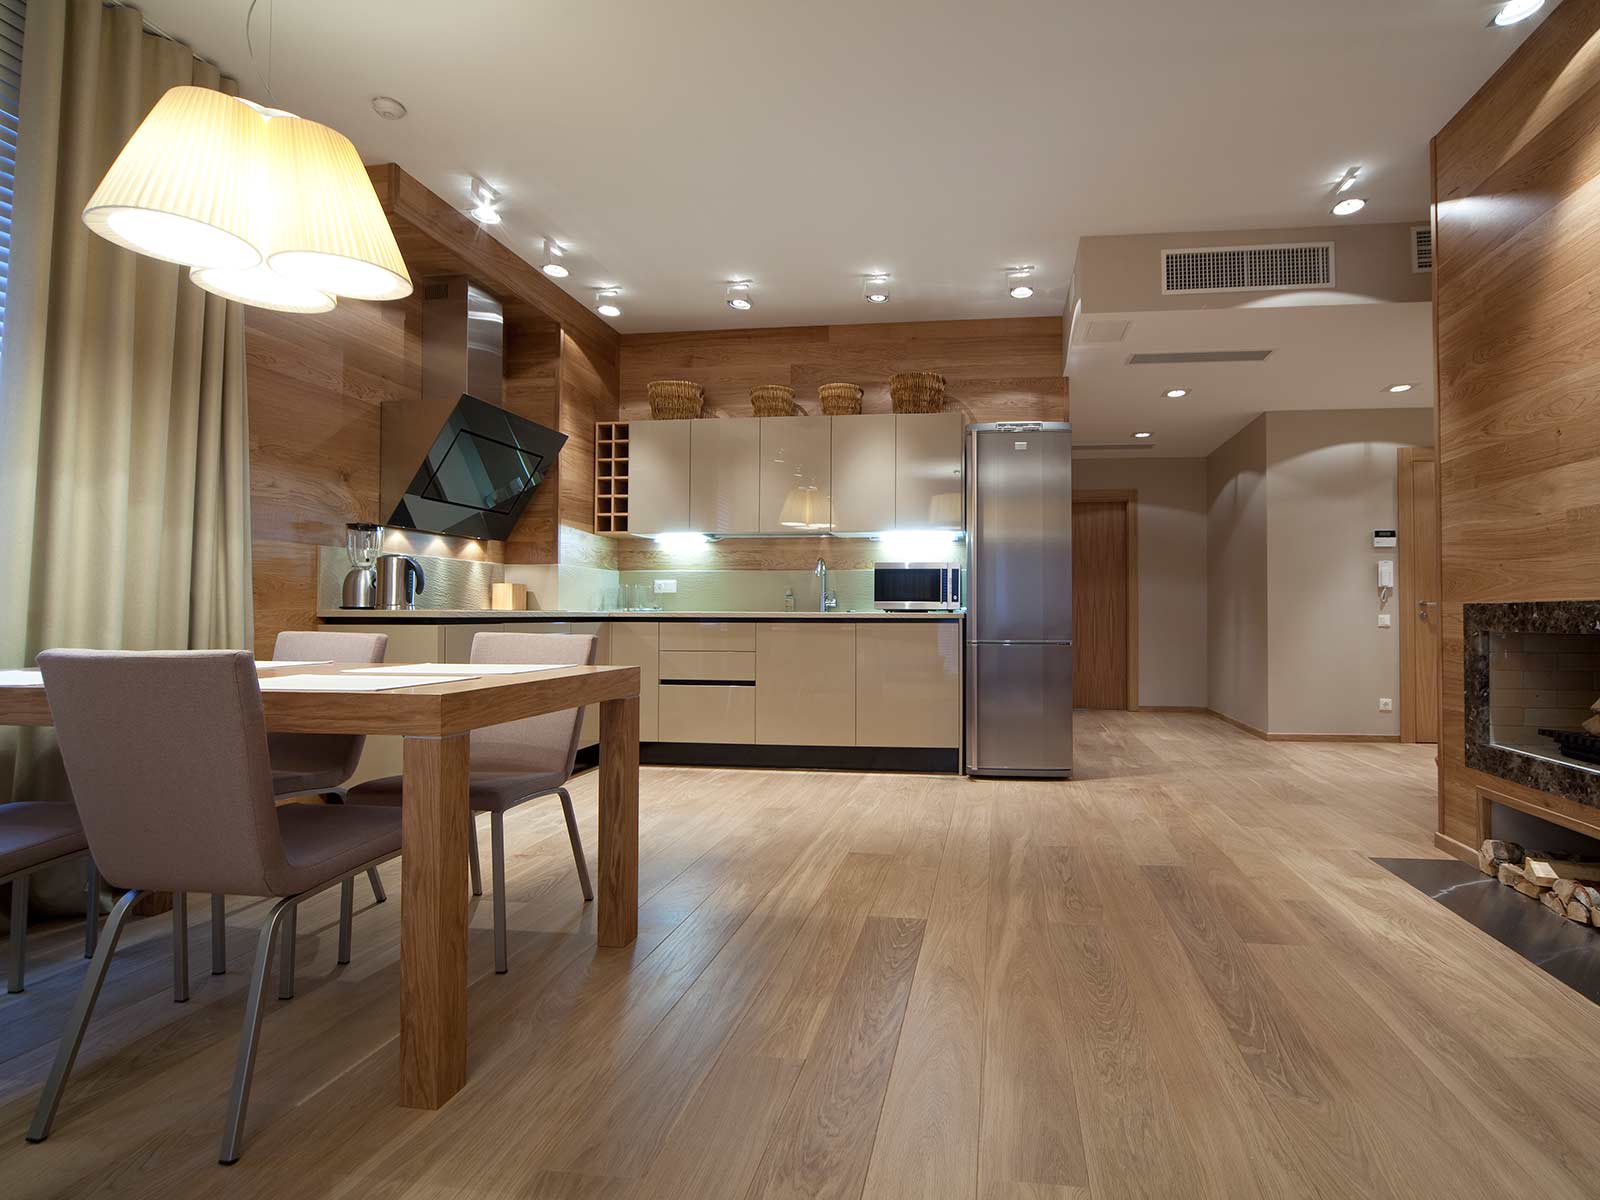 Luxurious natural looking kitchens by SHB